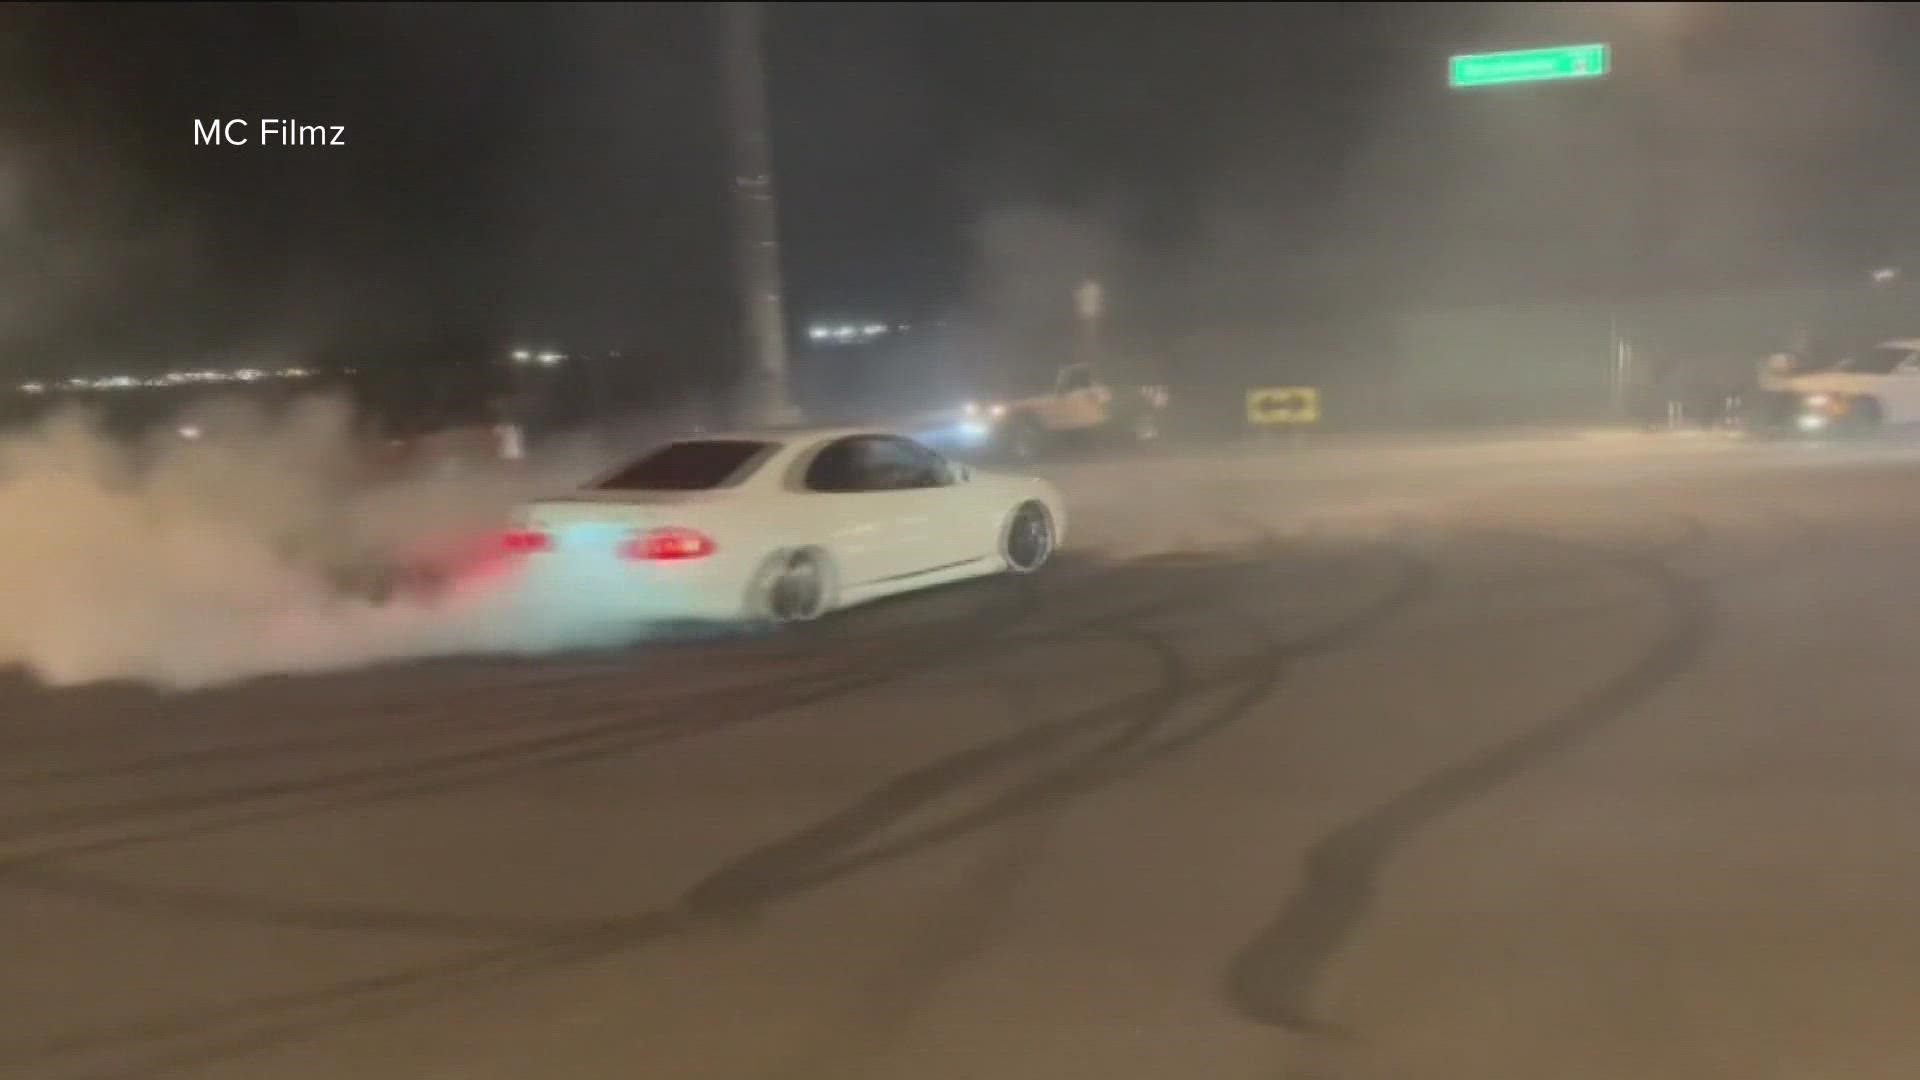 Phoenix police say street racing is to blame for a crash that killed 4 people. What is being done to reduce street racing and the penalties attached?